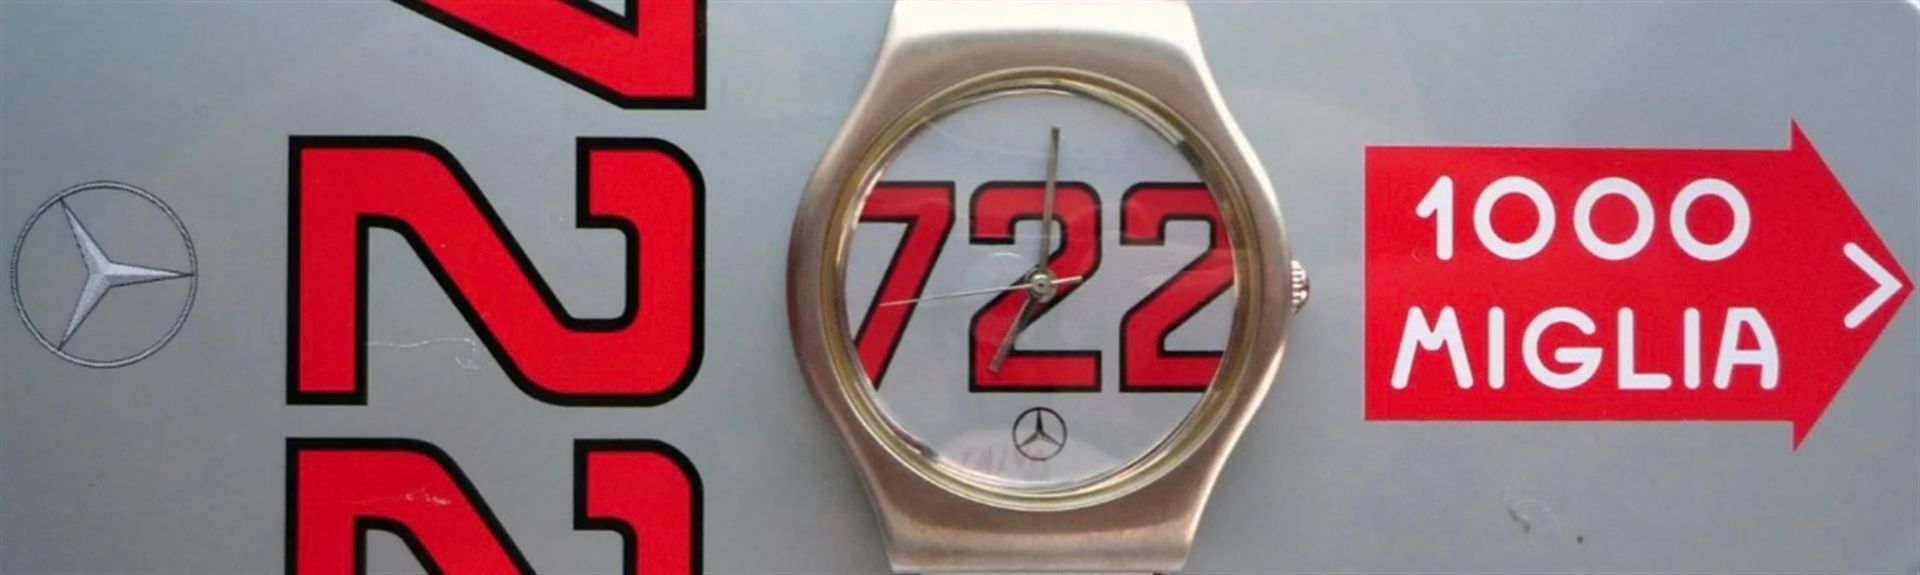 A Rare and Genuine Mercedes-Benz 722 Mille Miglia Classic Racing Watch - Image 10 of 10